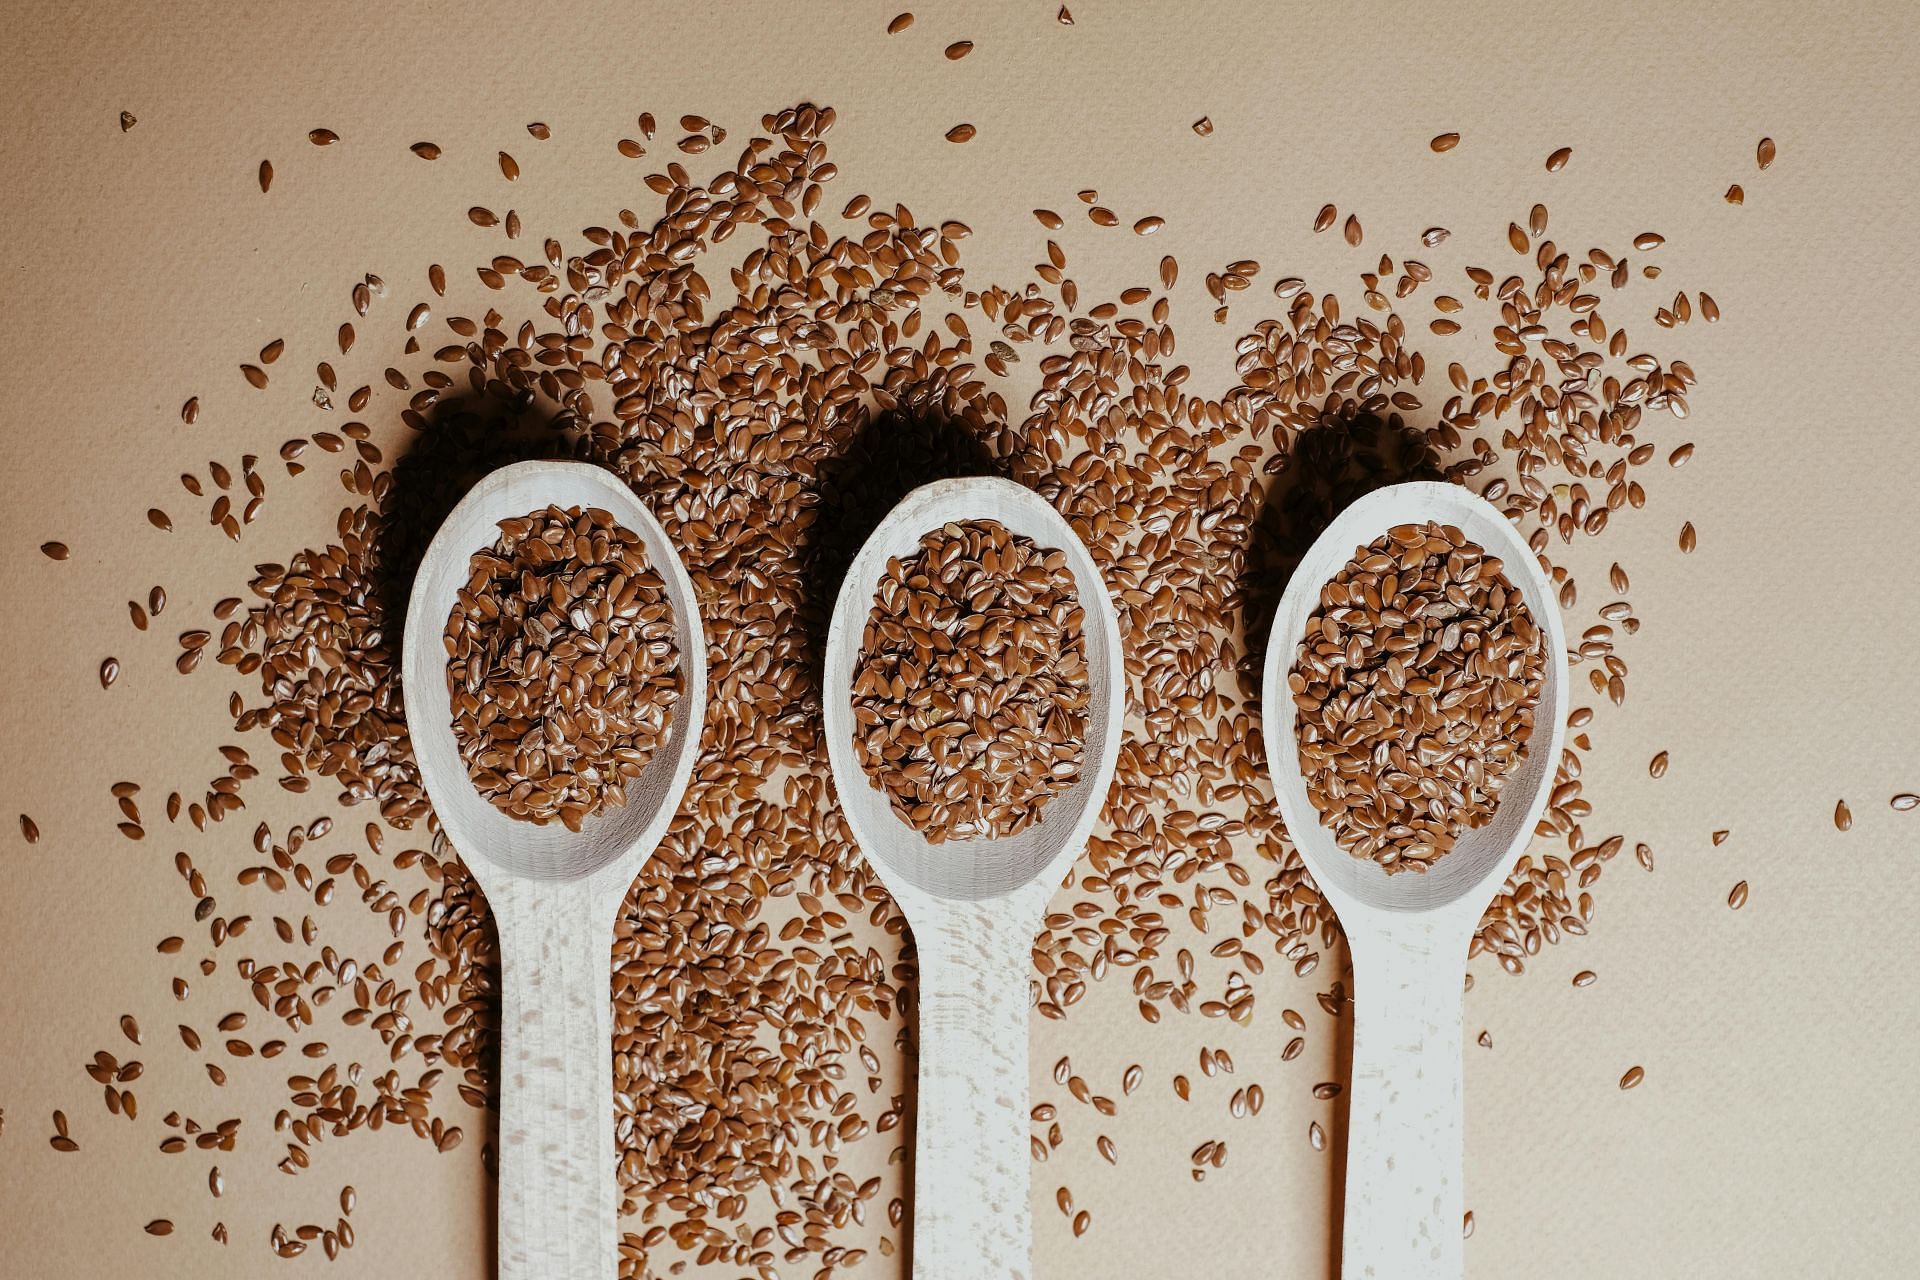 Importance of Chia seeds vs flax seeds (image sourced via Pexels / Photo by vie studio)